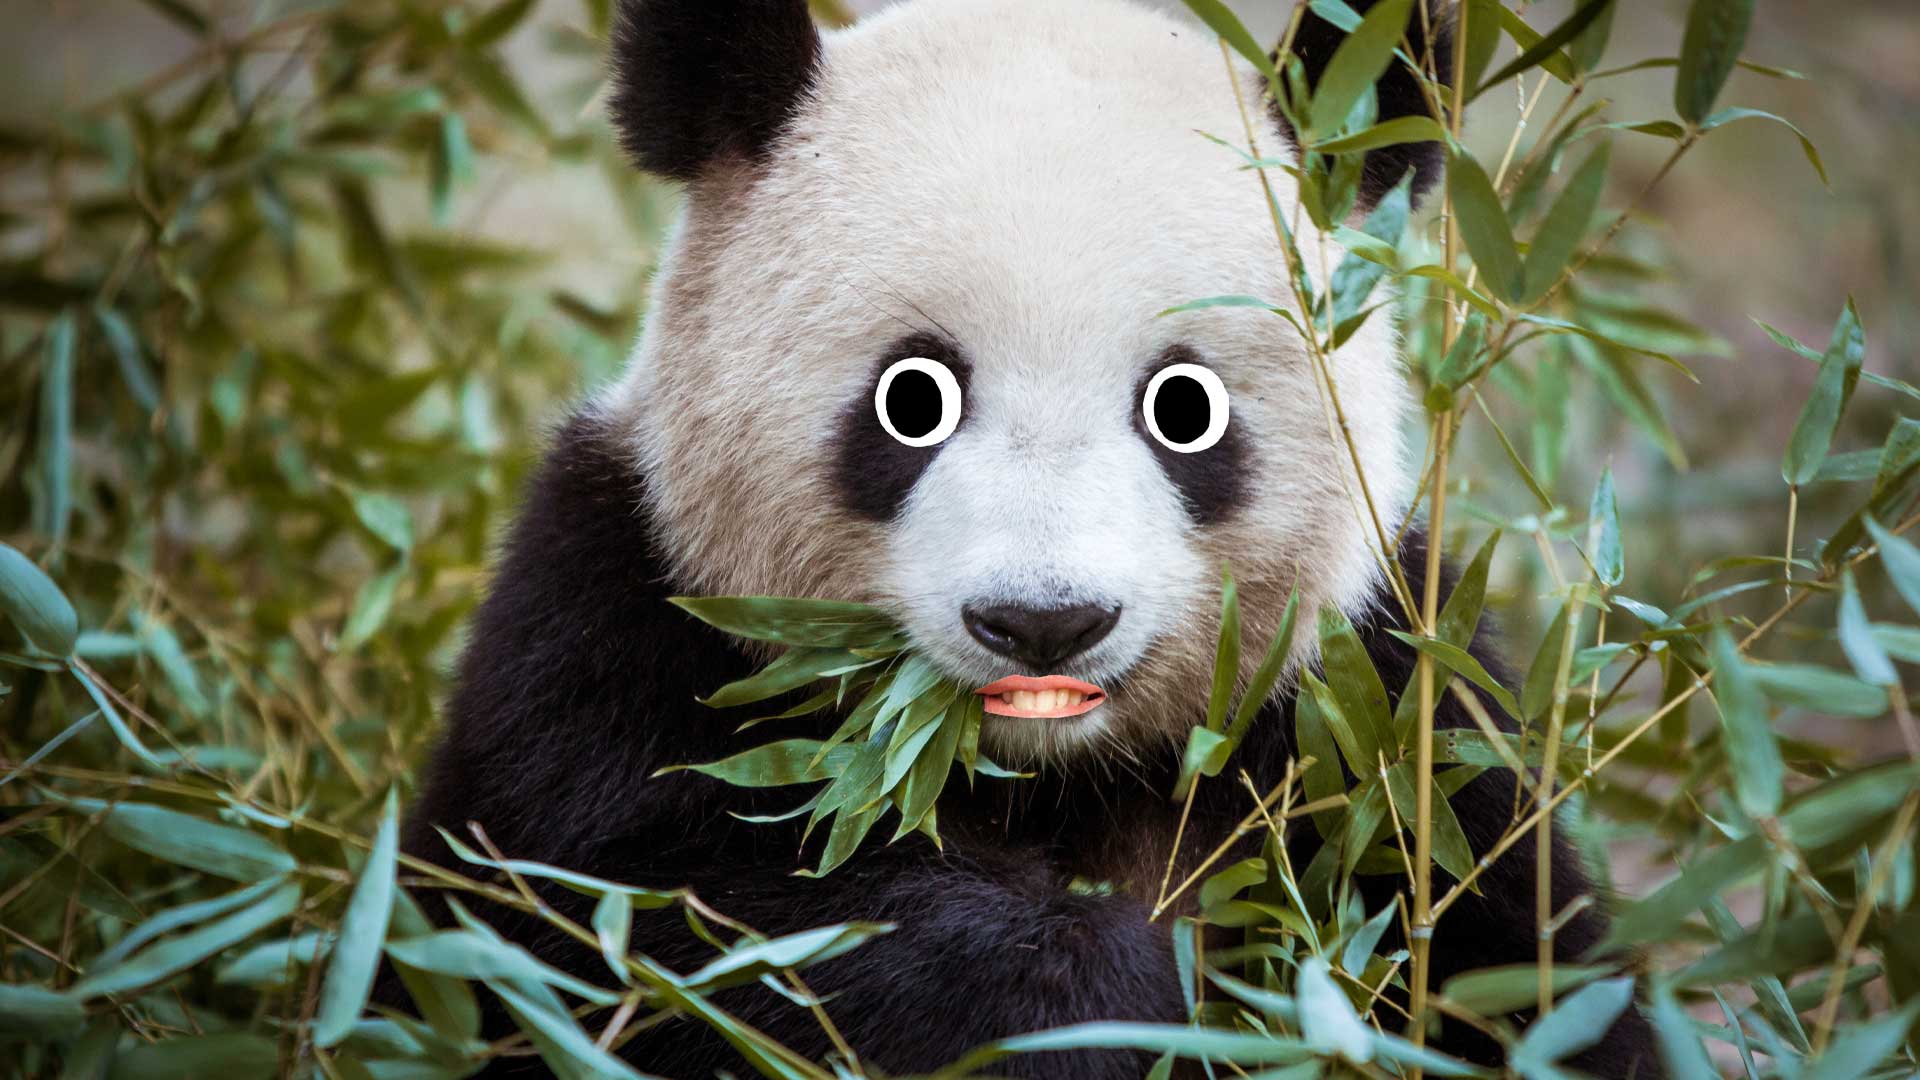 A panda chewing some bamboo leaves